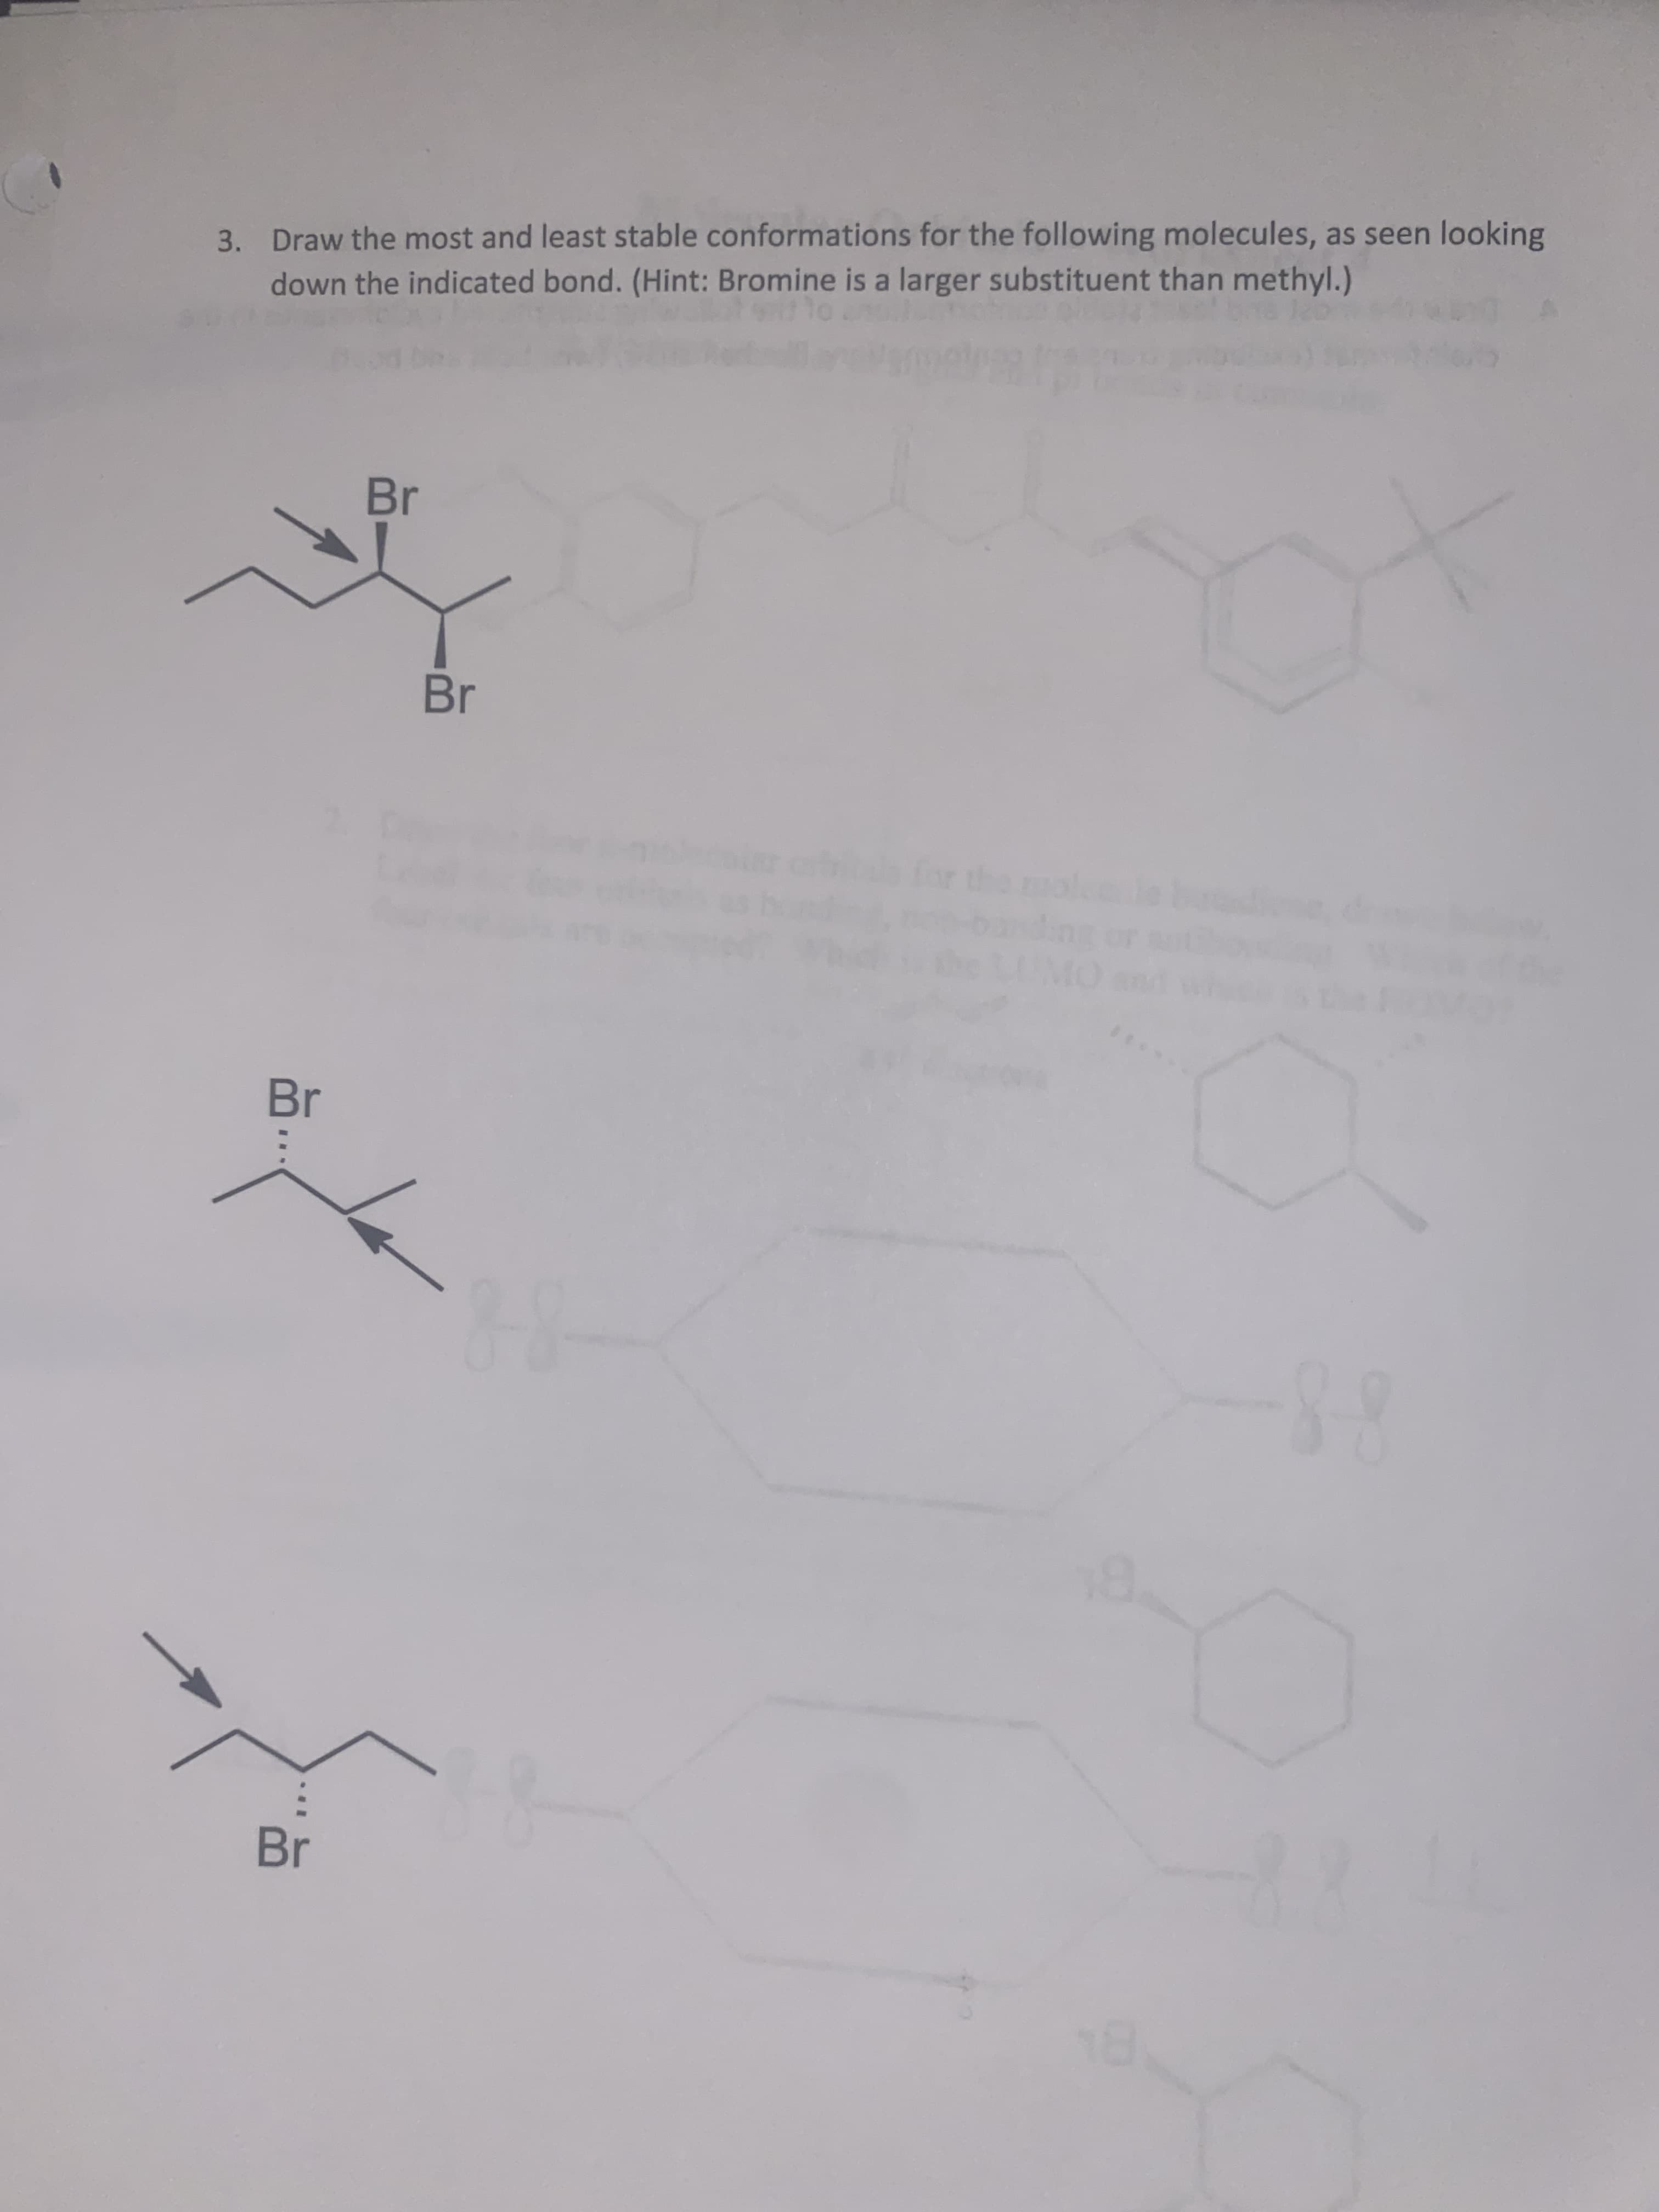 3. Draw the most and least stable conformations for the following molecules, as seen looking
down the indicated bond. (Hint: Bromine is a larger substituent than methyl.)
Br
Br
Br
Br
